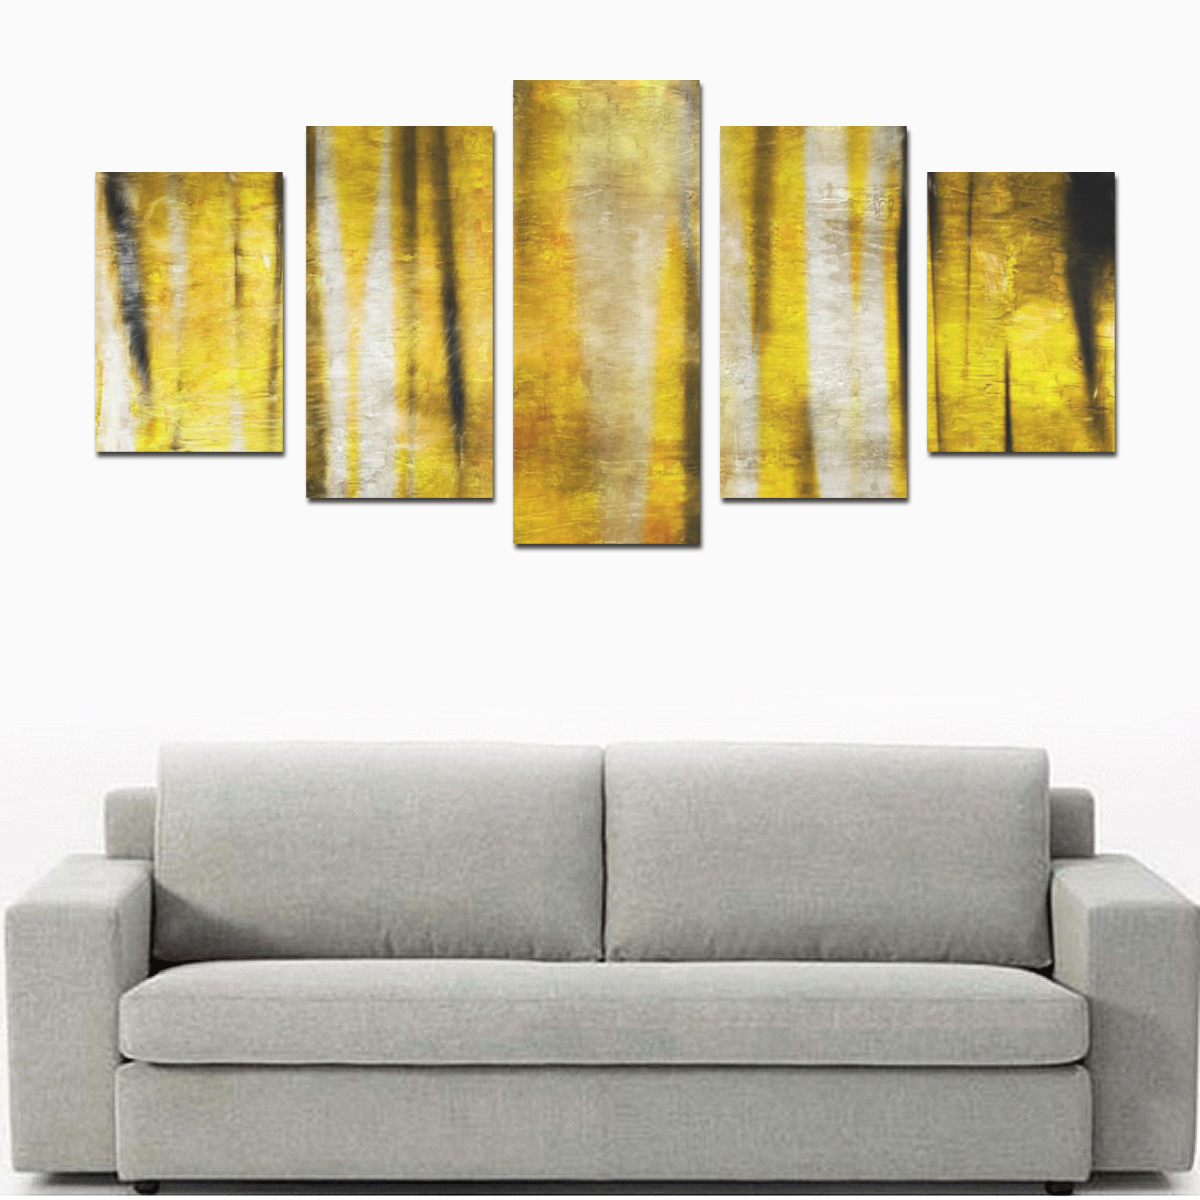 Gold and silver abstract decorative design Canvas Print Sets D (No Frame)